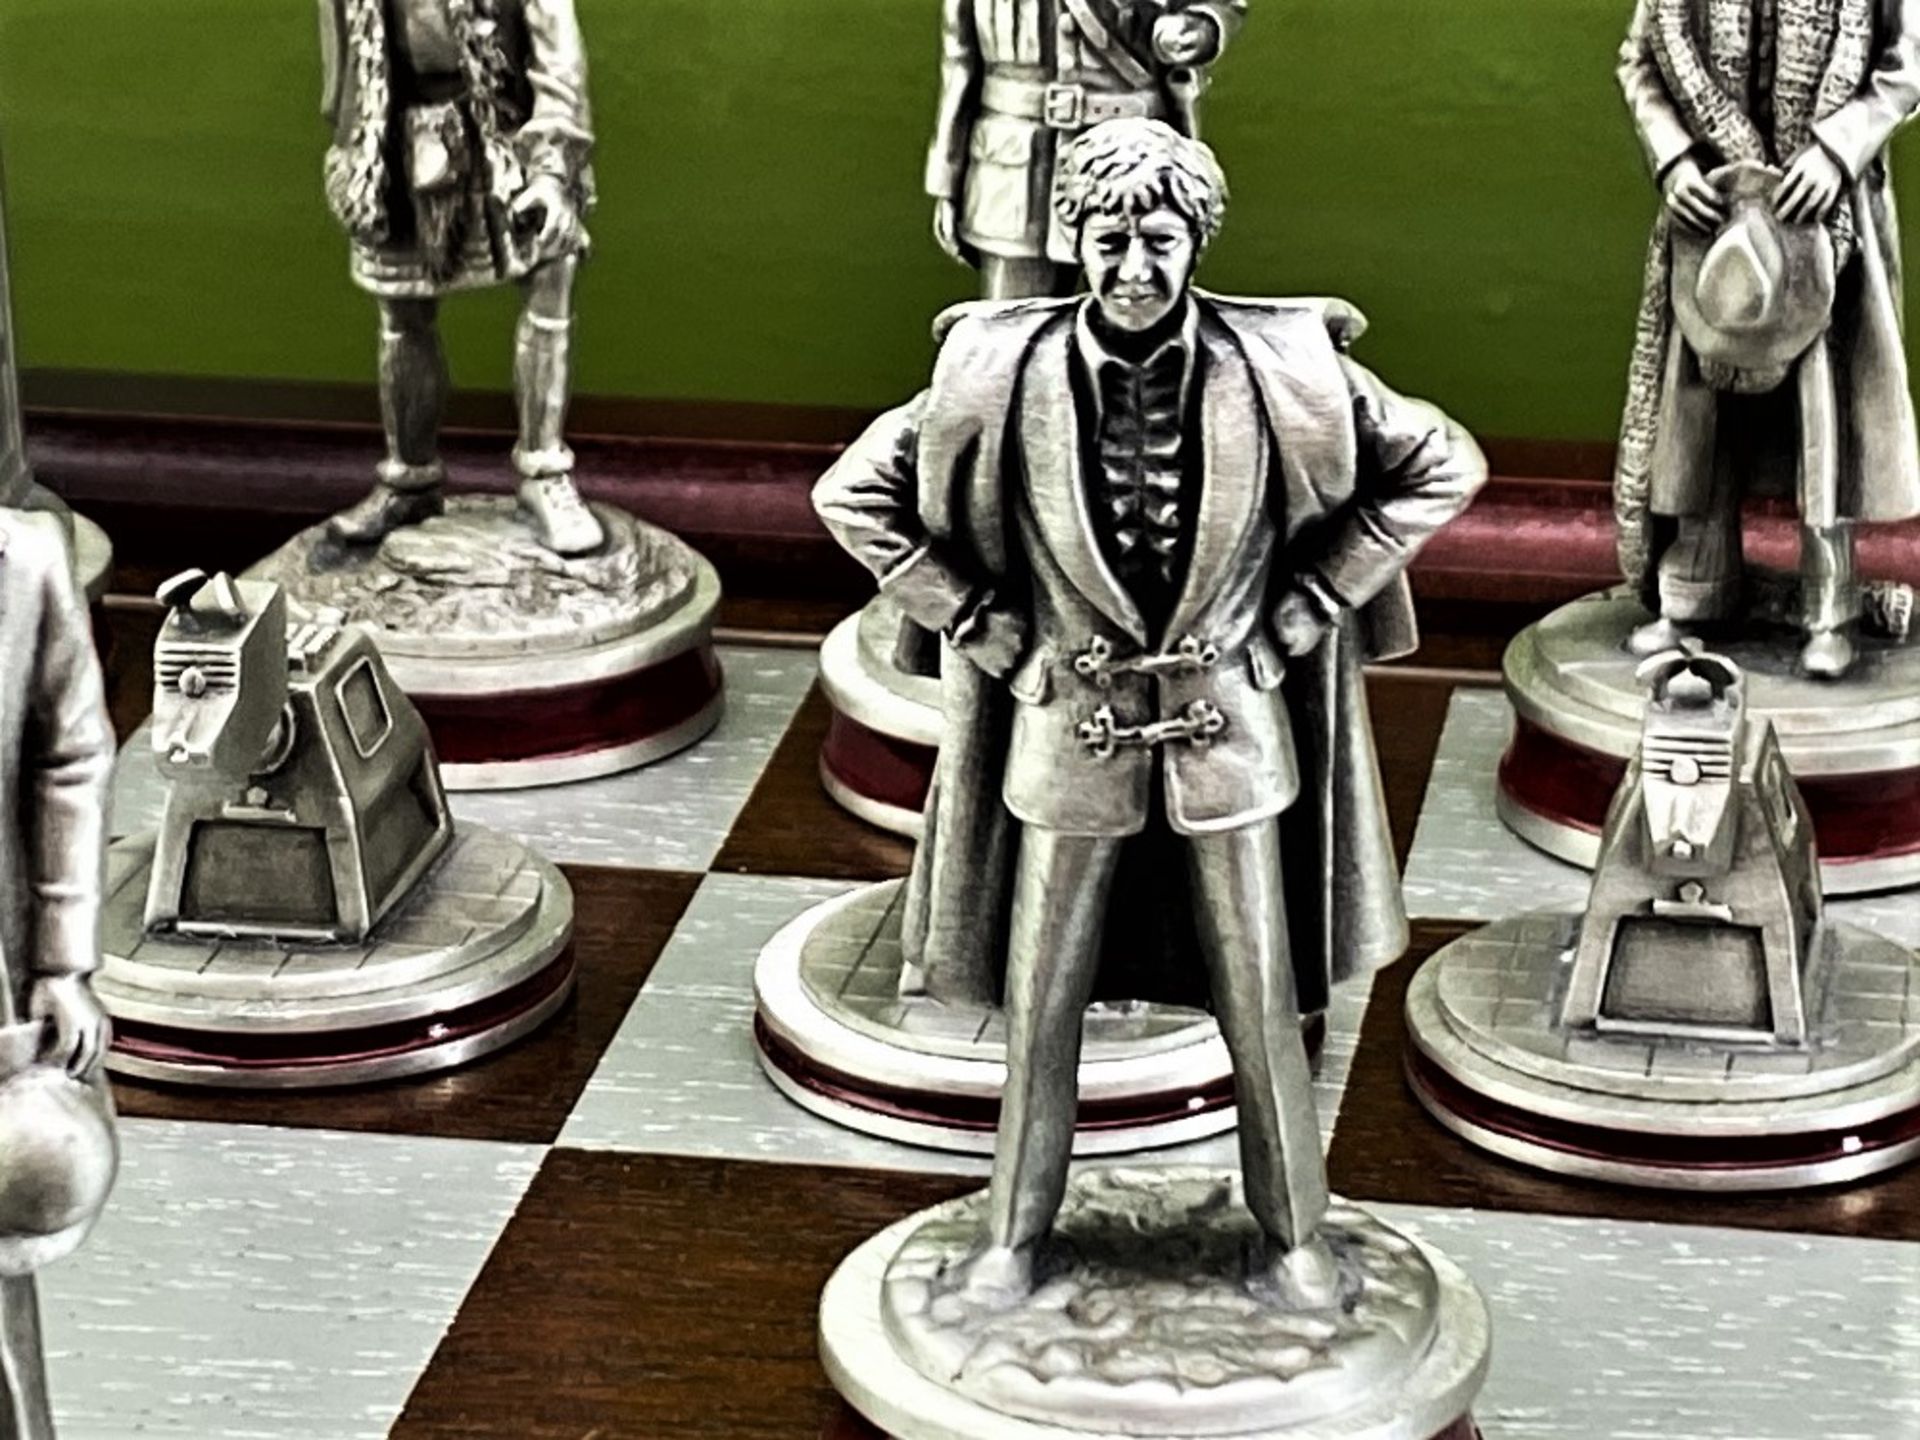 Dr Doctor Who Danbury Mint Pewter Collectors Edition Chess Set - Image 8 of 9